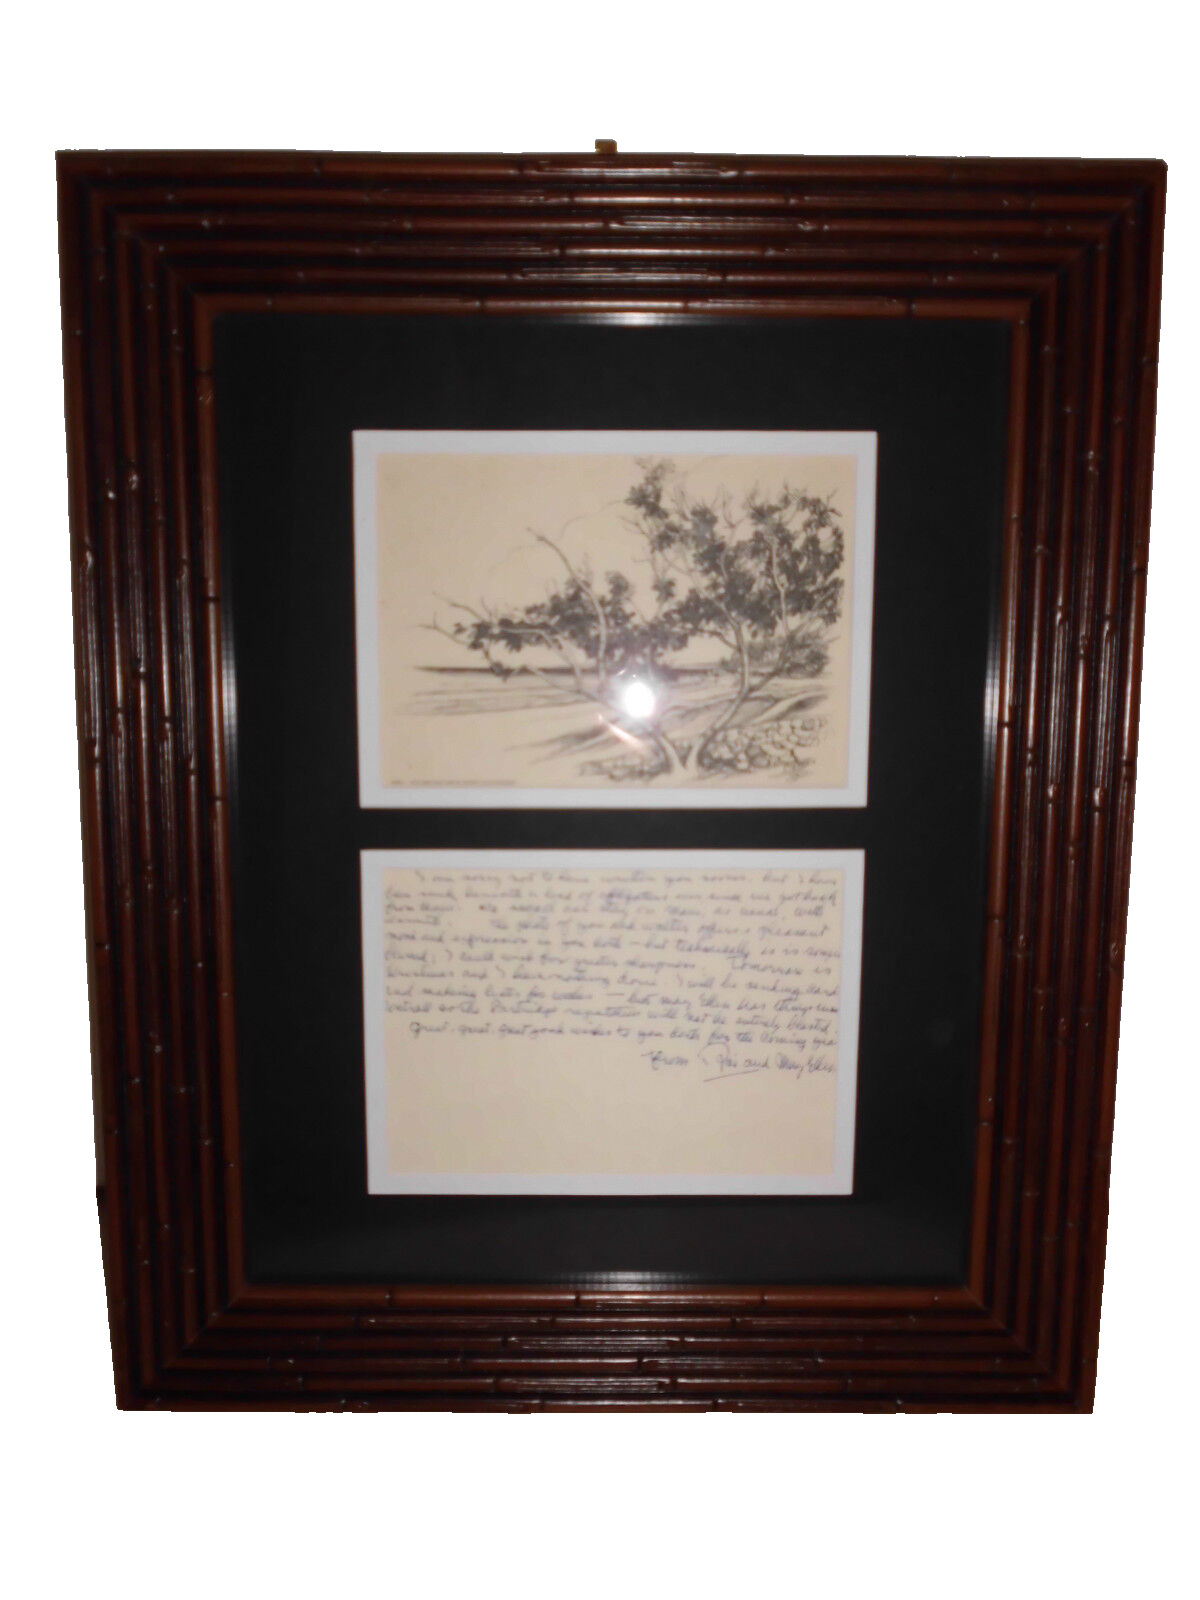 Rare Framed Roi Partridge Personal Christmas Card with Hand Written Note Vintage